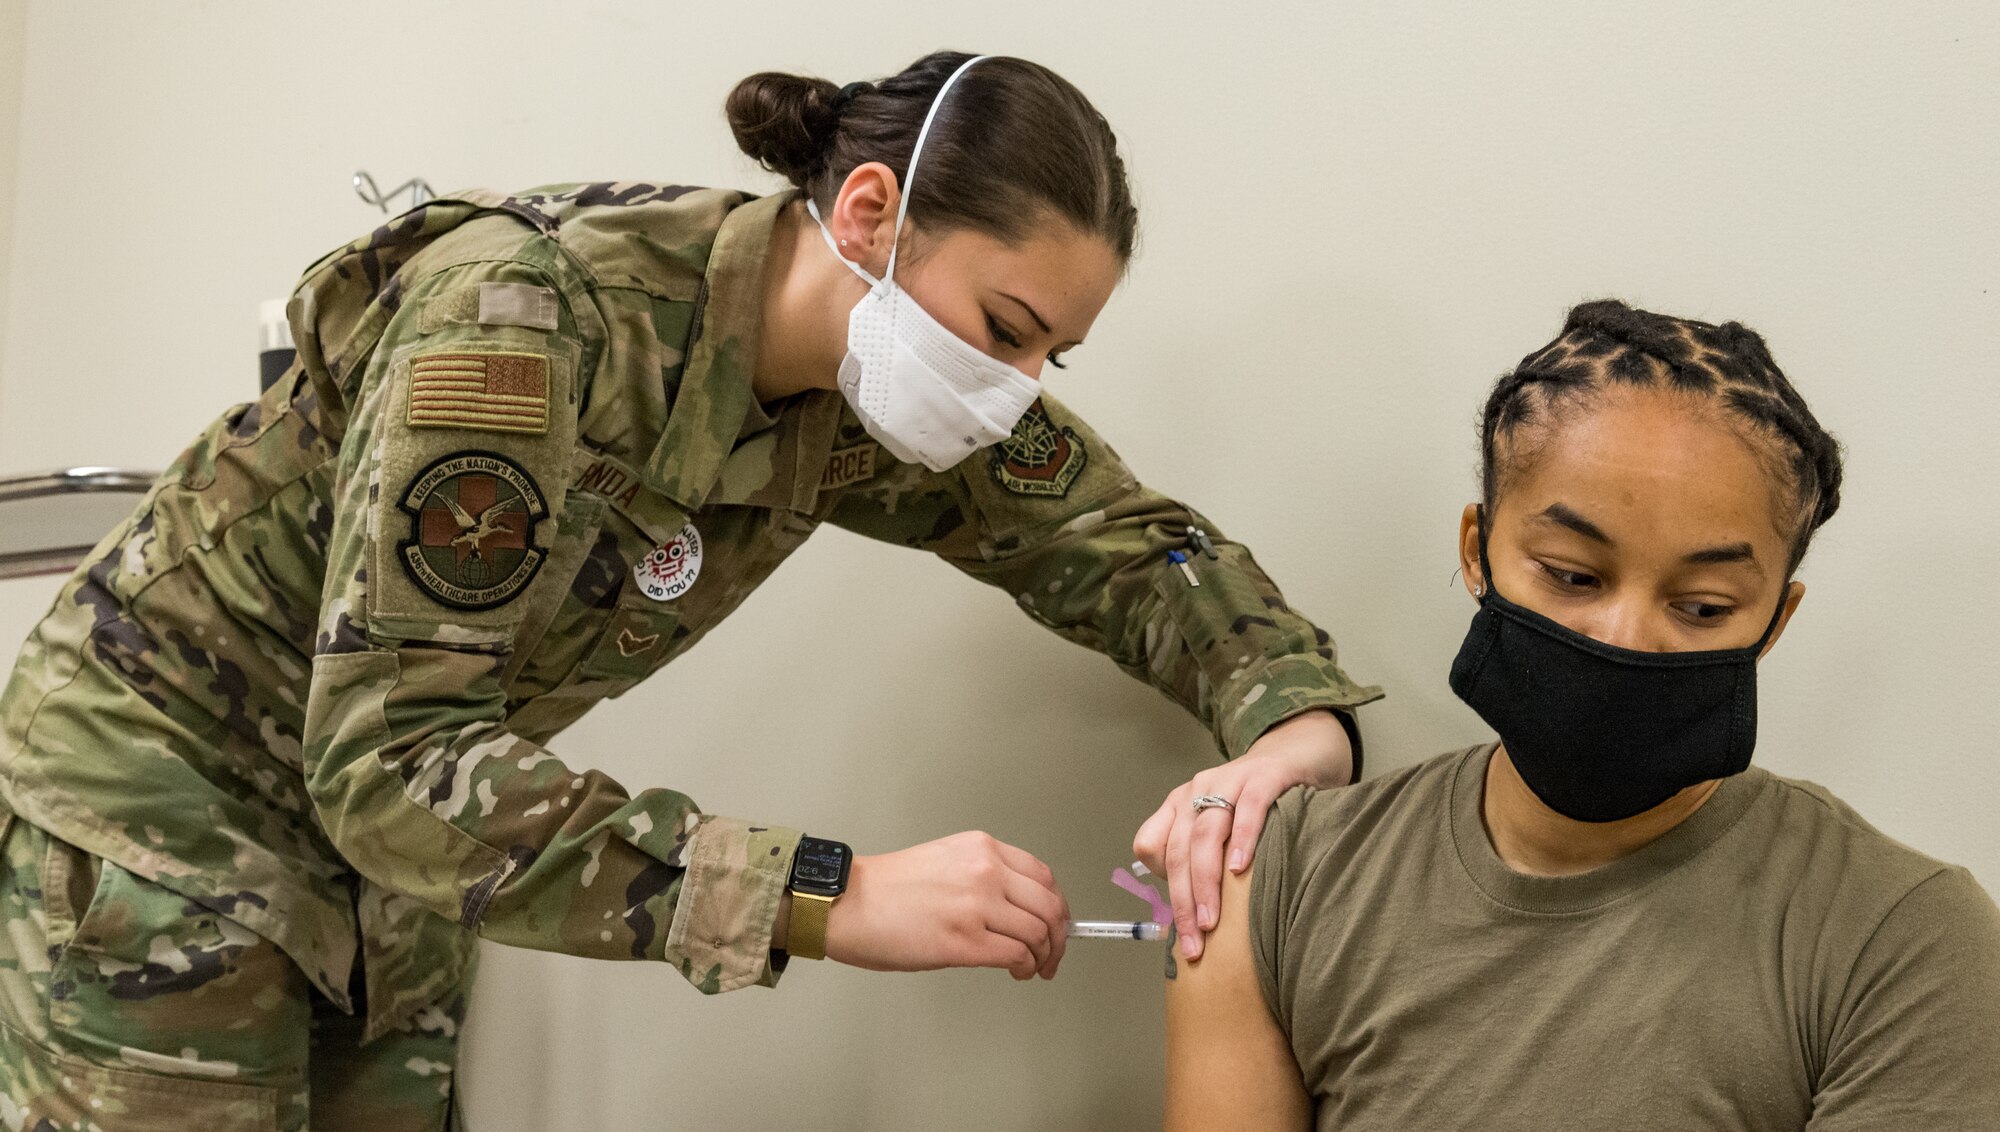 Tech. Sgt. Tiana White, 436th Airlift Wing Tactics and Leadership Nexus cadre, receives the COVID-19 vaccine administered by Airman 1st Class Madelyn Renda, 436th Healthcare Operations Squadron medical technician, Jan. 22, 2021, at Dover Air Force Base, Delaware. White was among the first Team Dover members who voluntarily received the vaccine in accordance with Department of Defense guidance. The vaccine was granted emergency use authorization by the U.S. Food and Drug Administration for use in prevention of COVID-19. (U.S. Air Force photo by Roland Balik)